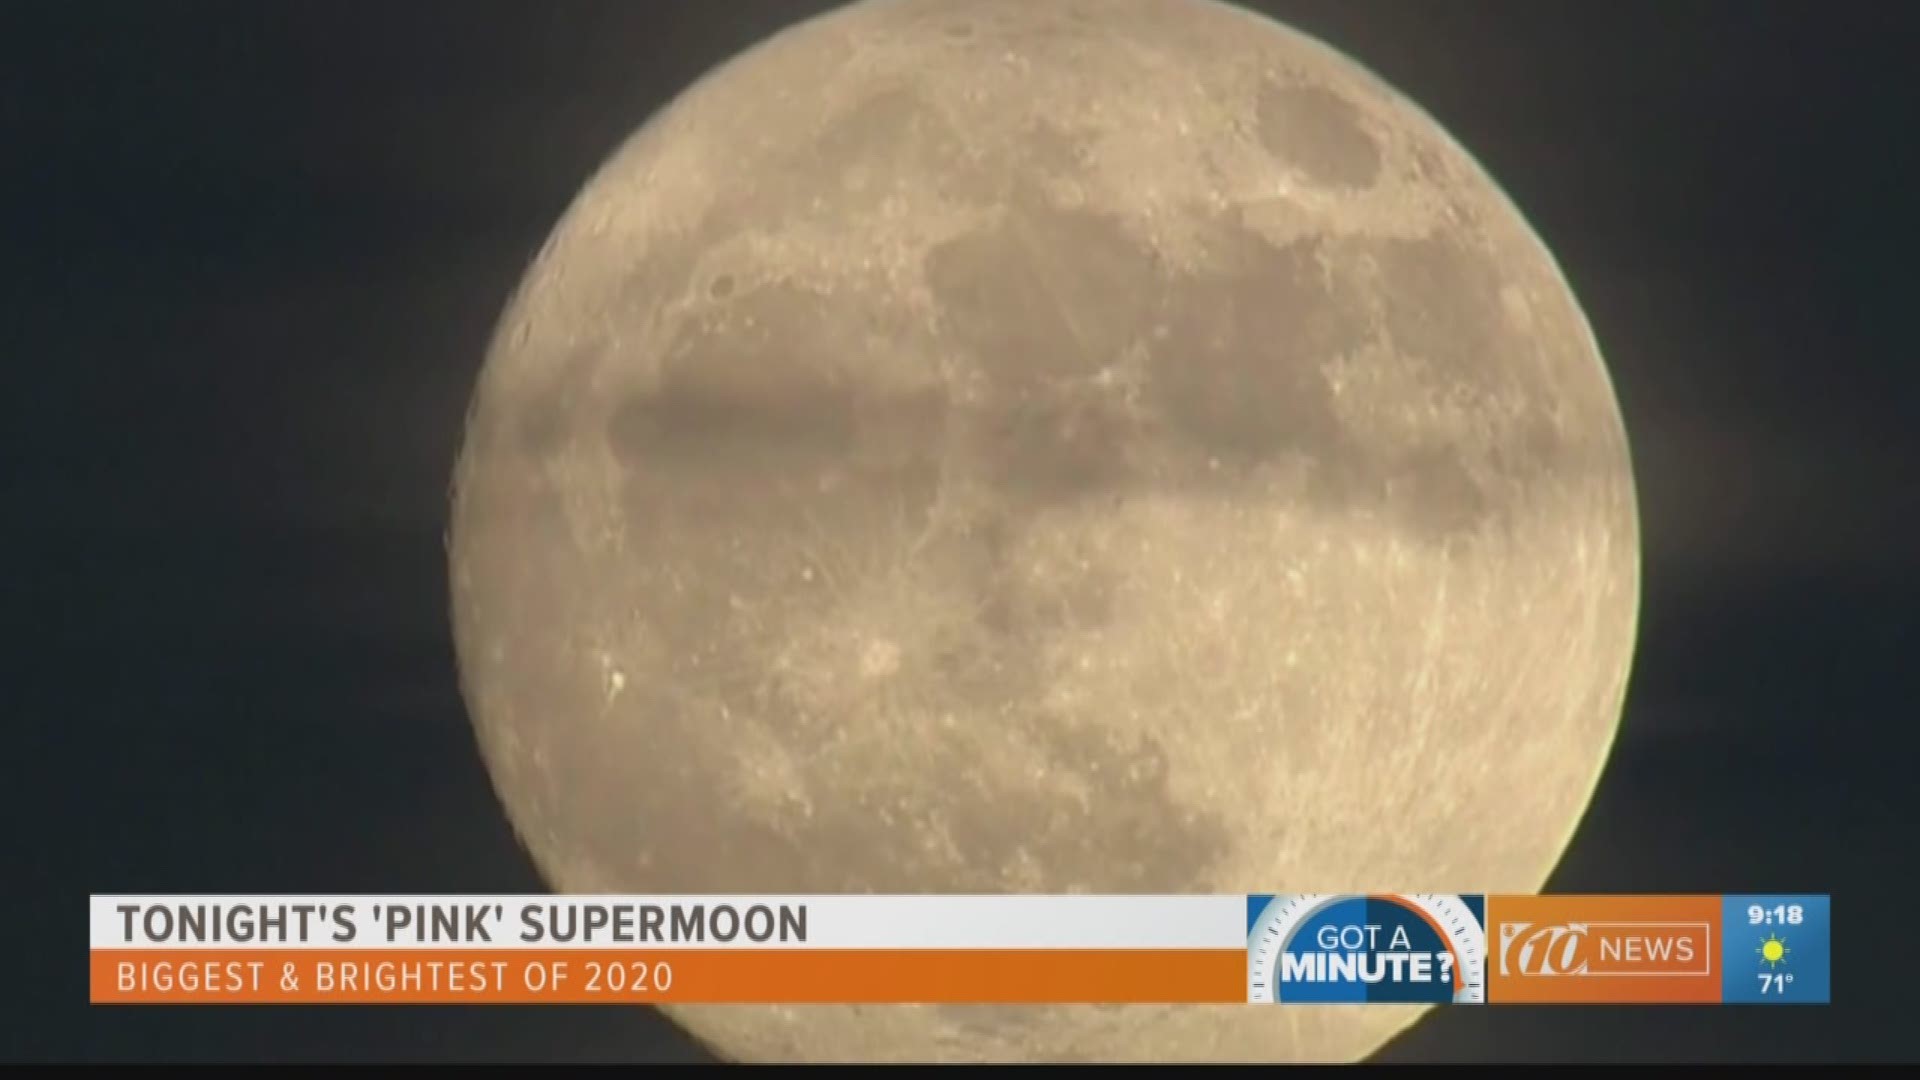 The "Pink" Supermoon will be peaking Tuesday night at about 10:35.